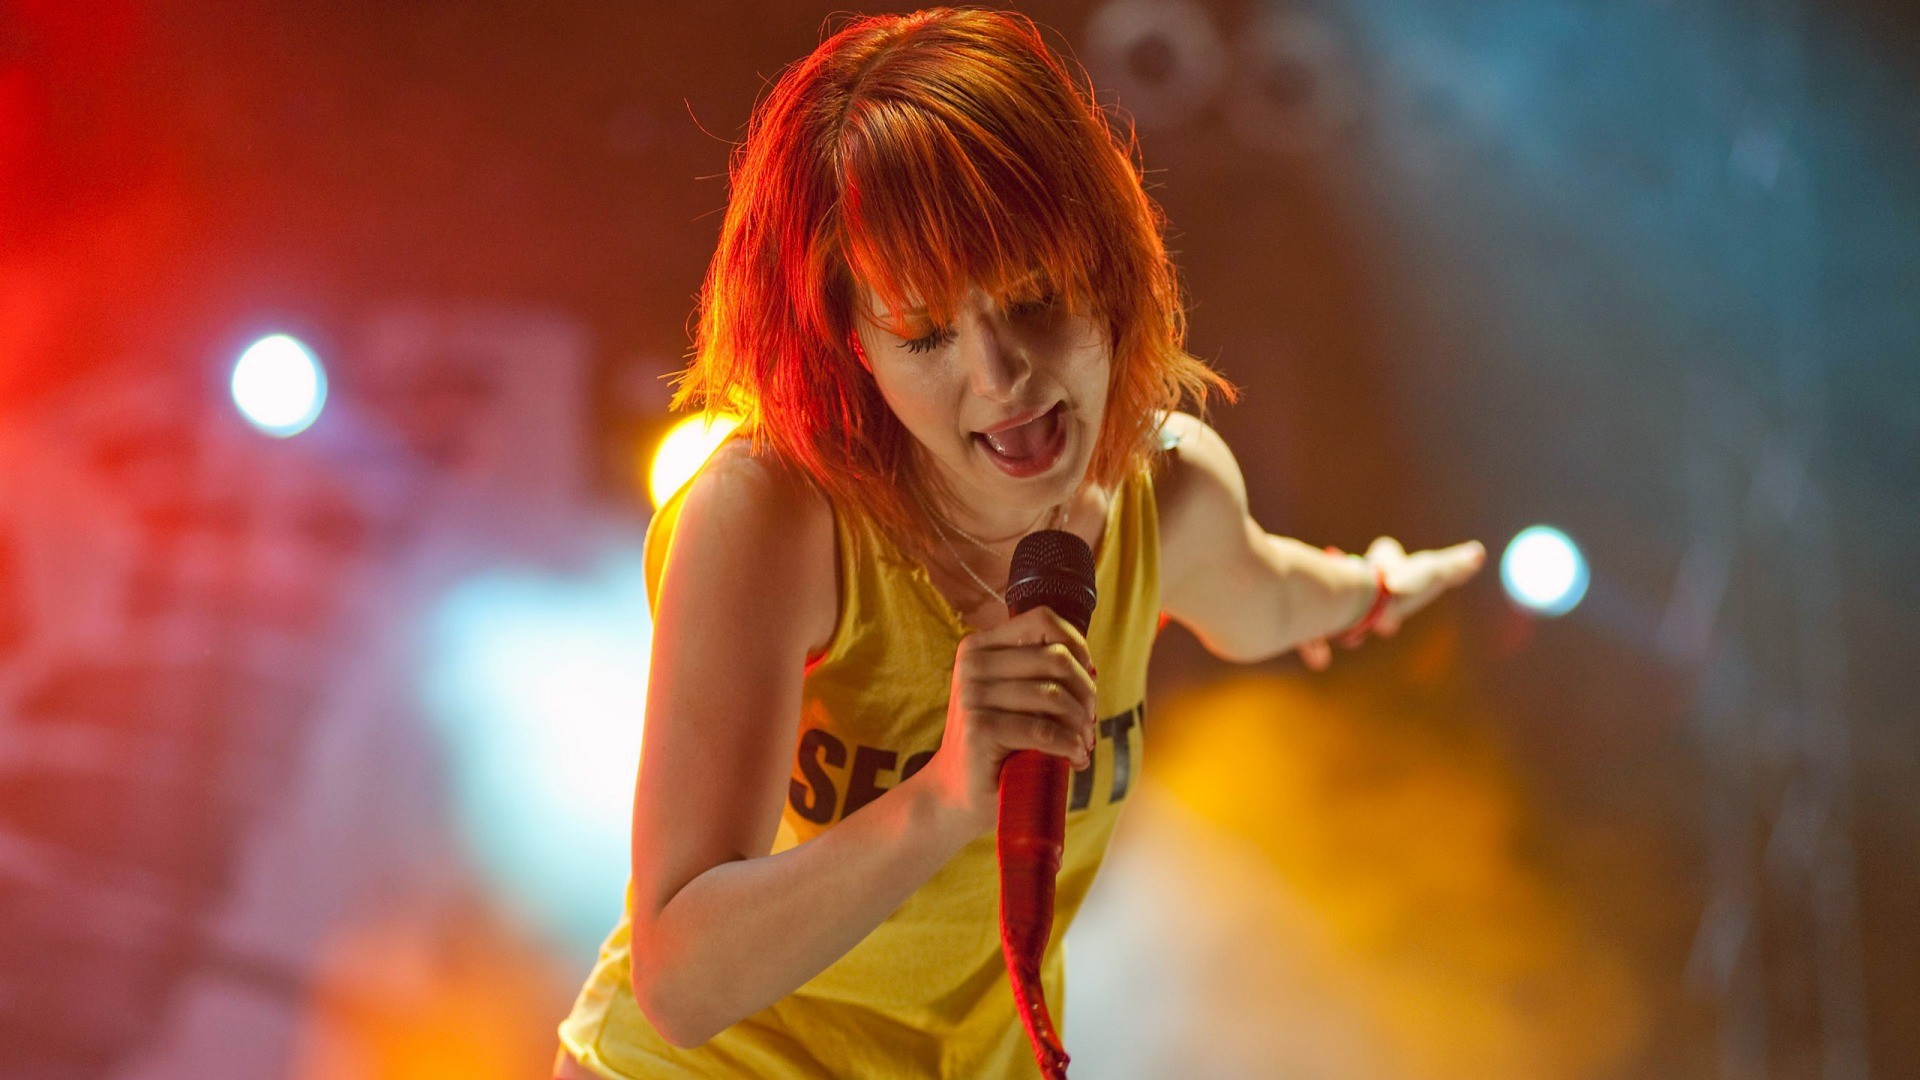 Singer Hayley Williams wallpapers and images - wallpapers ...